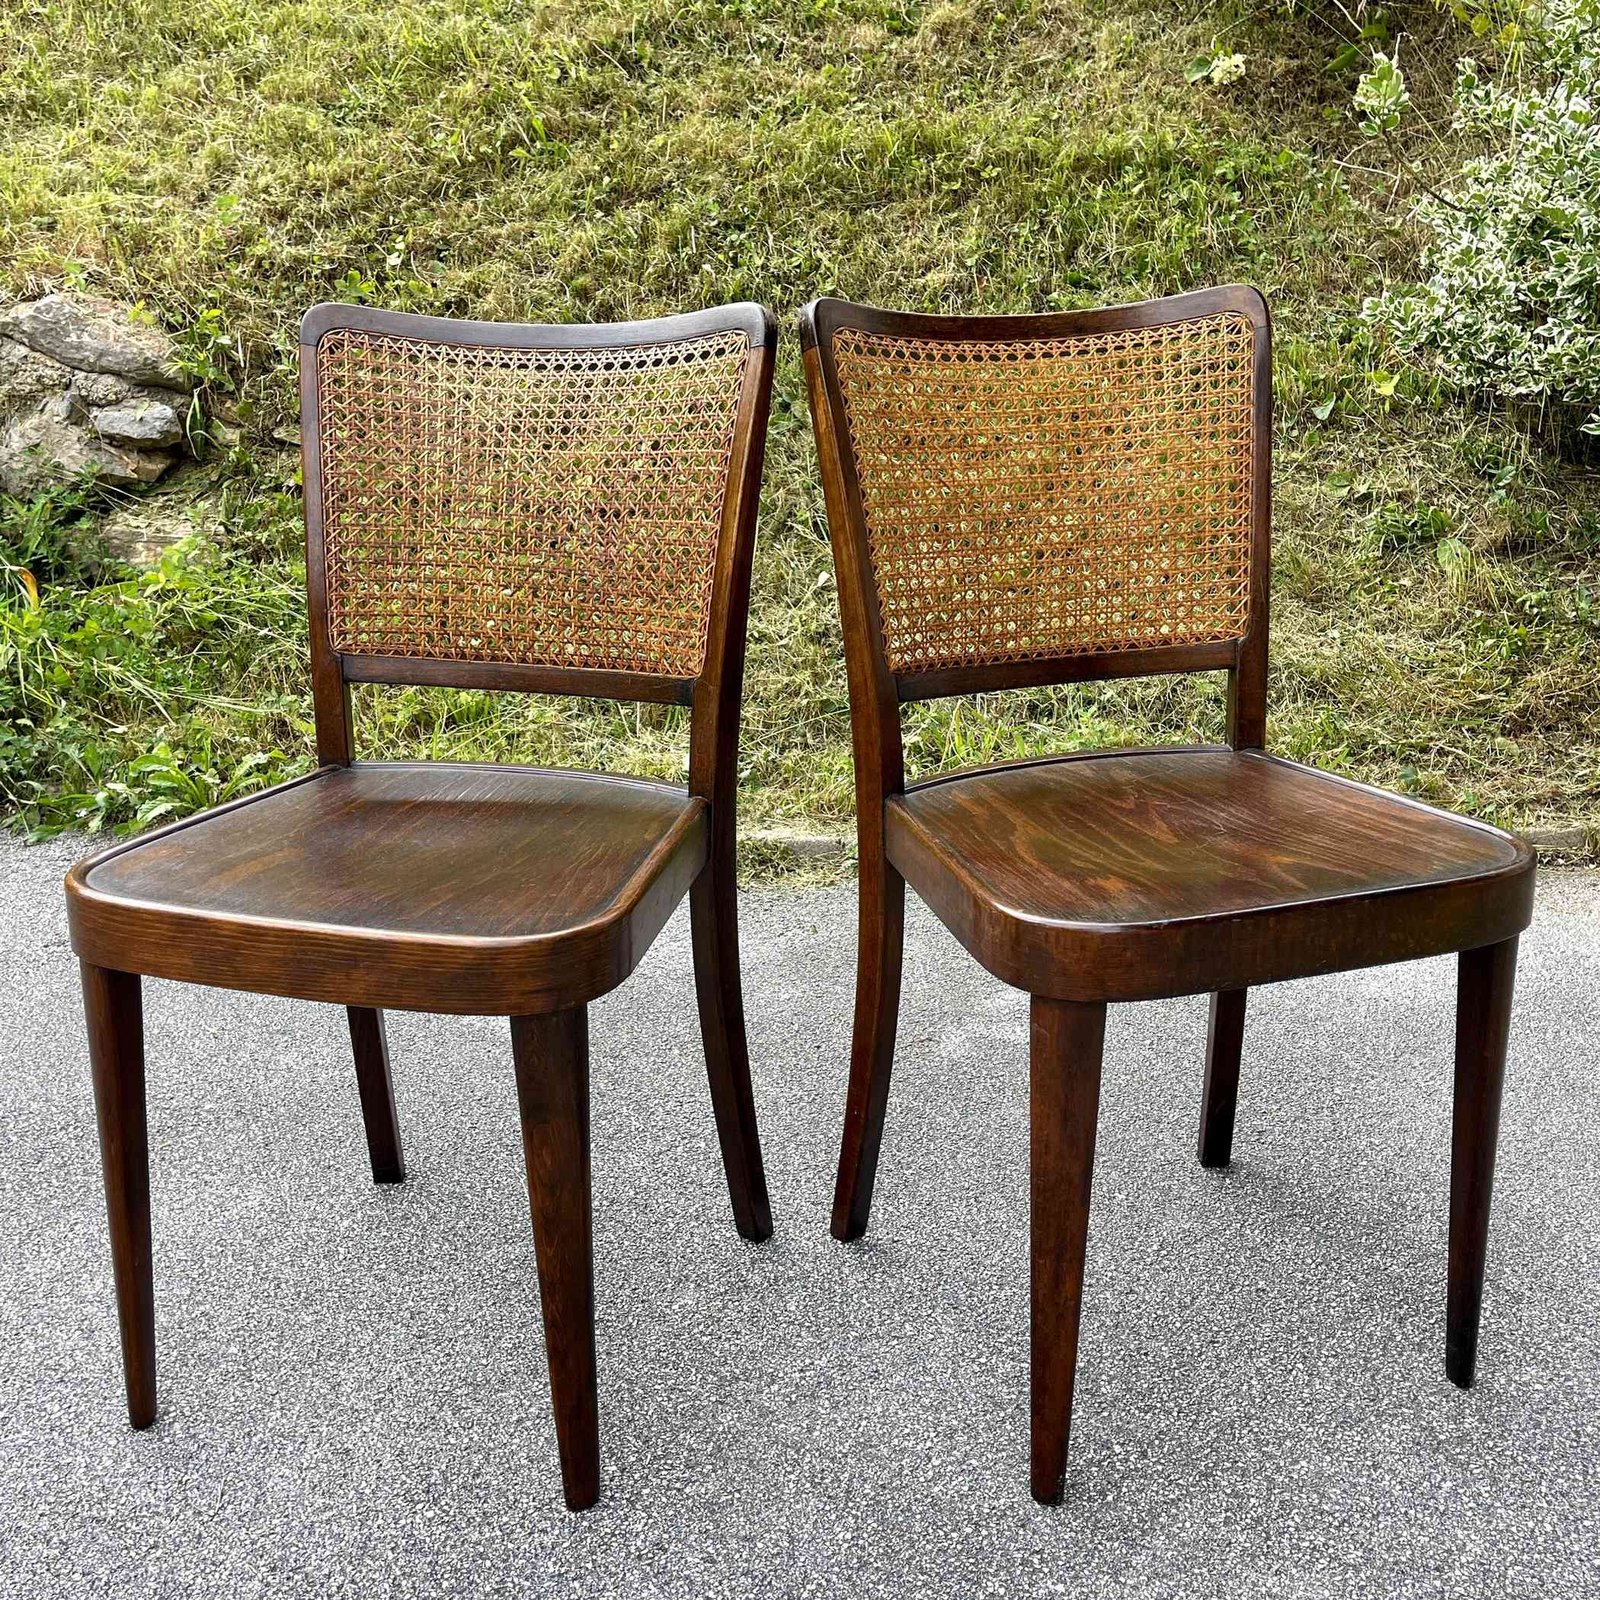 Set of 2 wood dining chairs Austria 1950s Rustic Farmhouse Chair Vintage chair